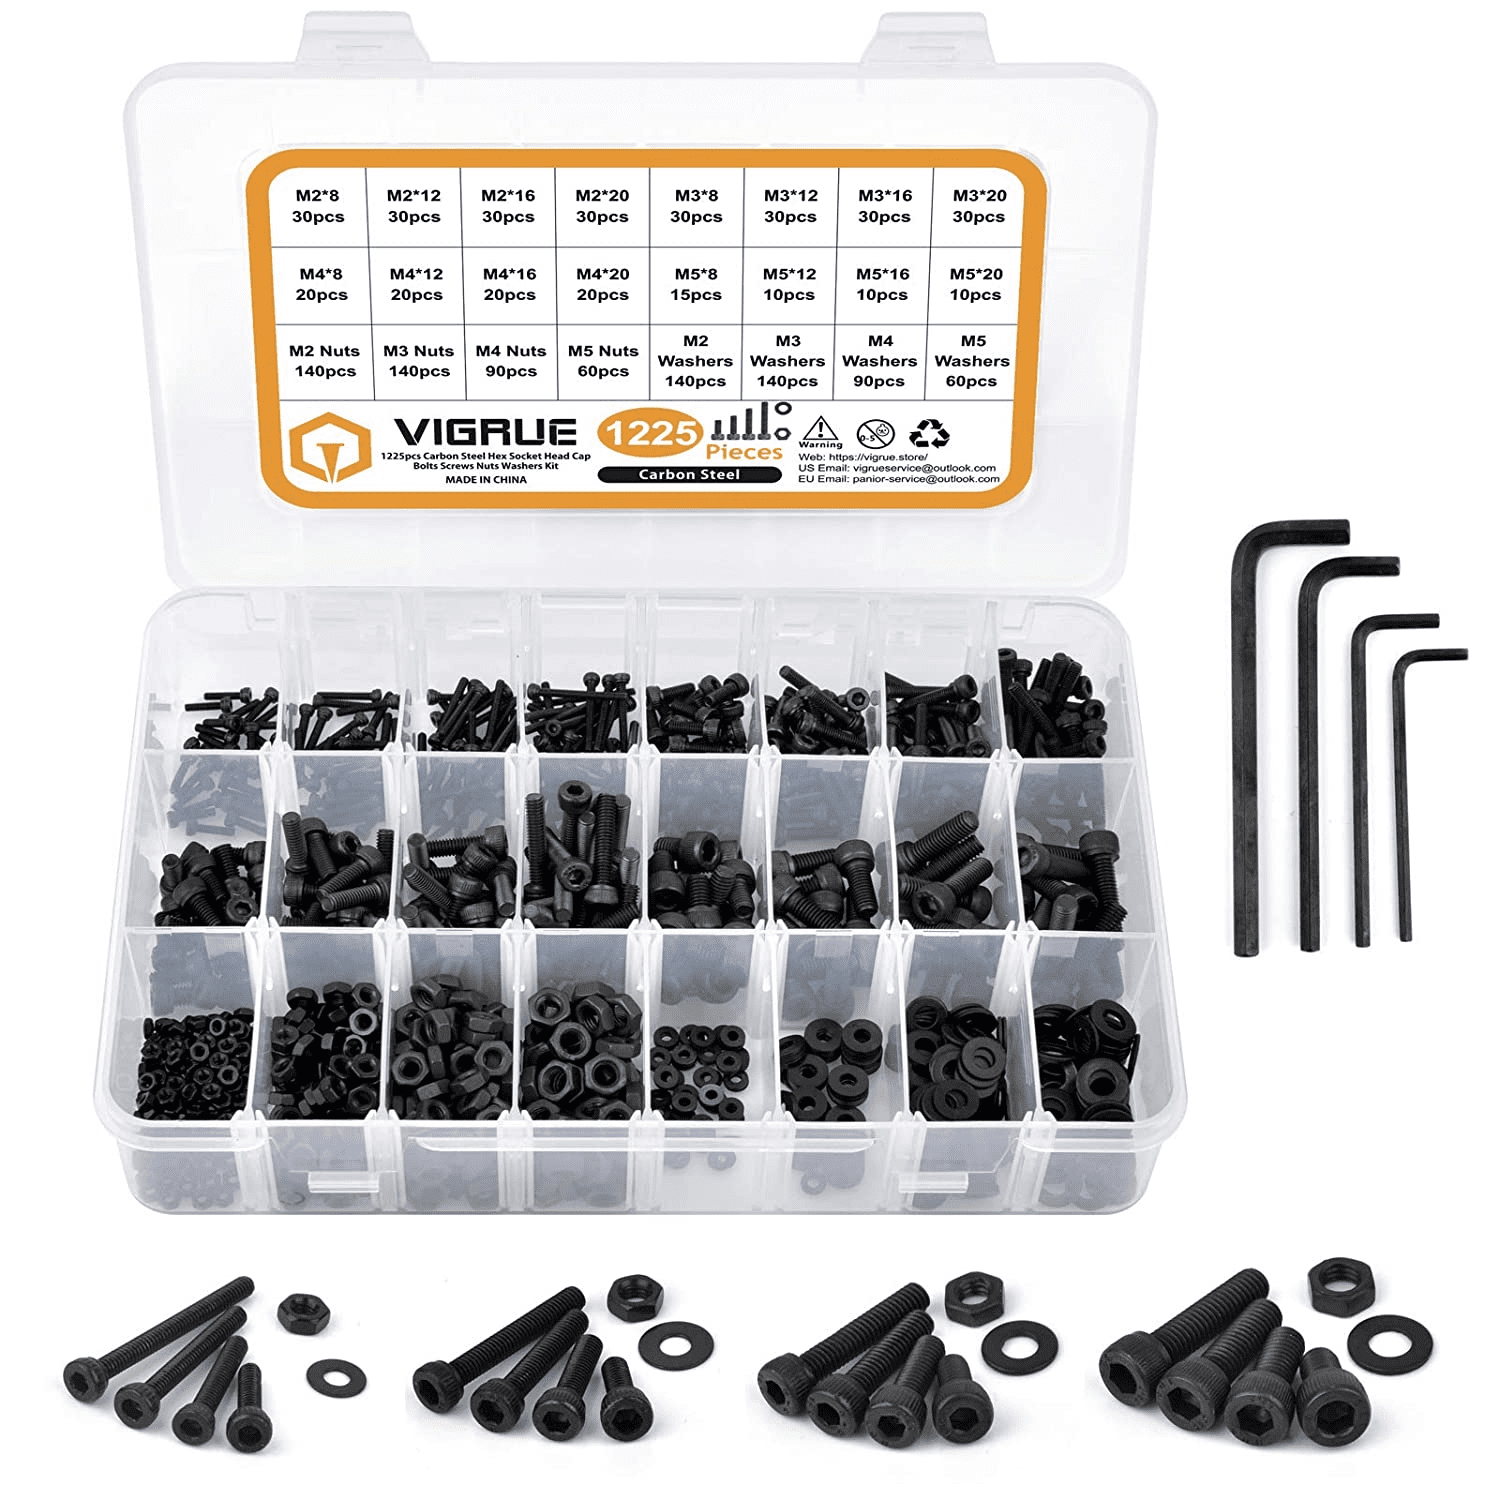 740 ASSORTED NUMBER PLATE 1" SCREWS COVER CAPS & M6 NUTS KIT M6 PLASTIC BOLTS 